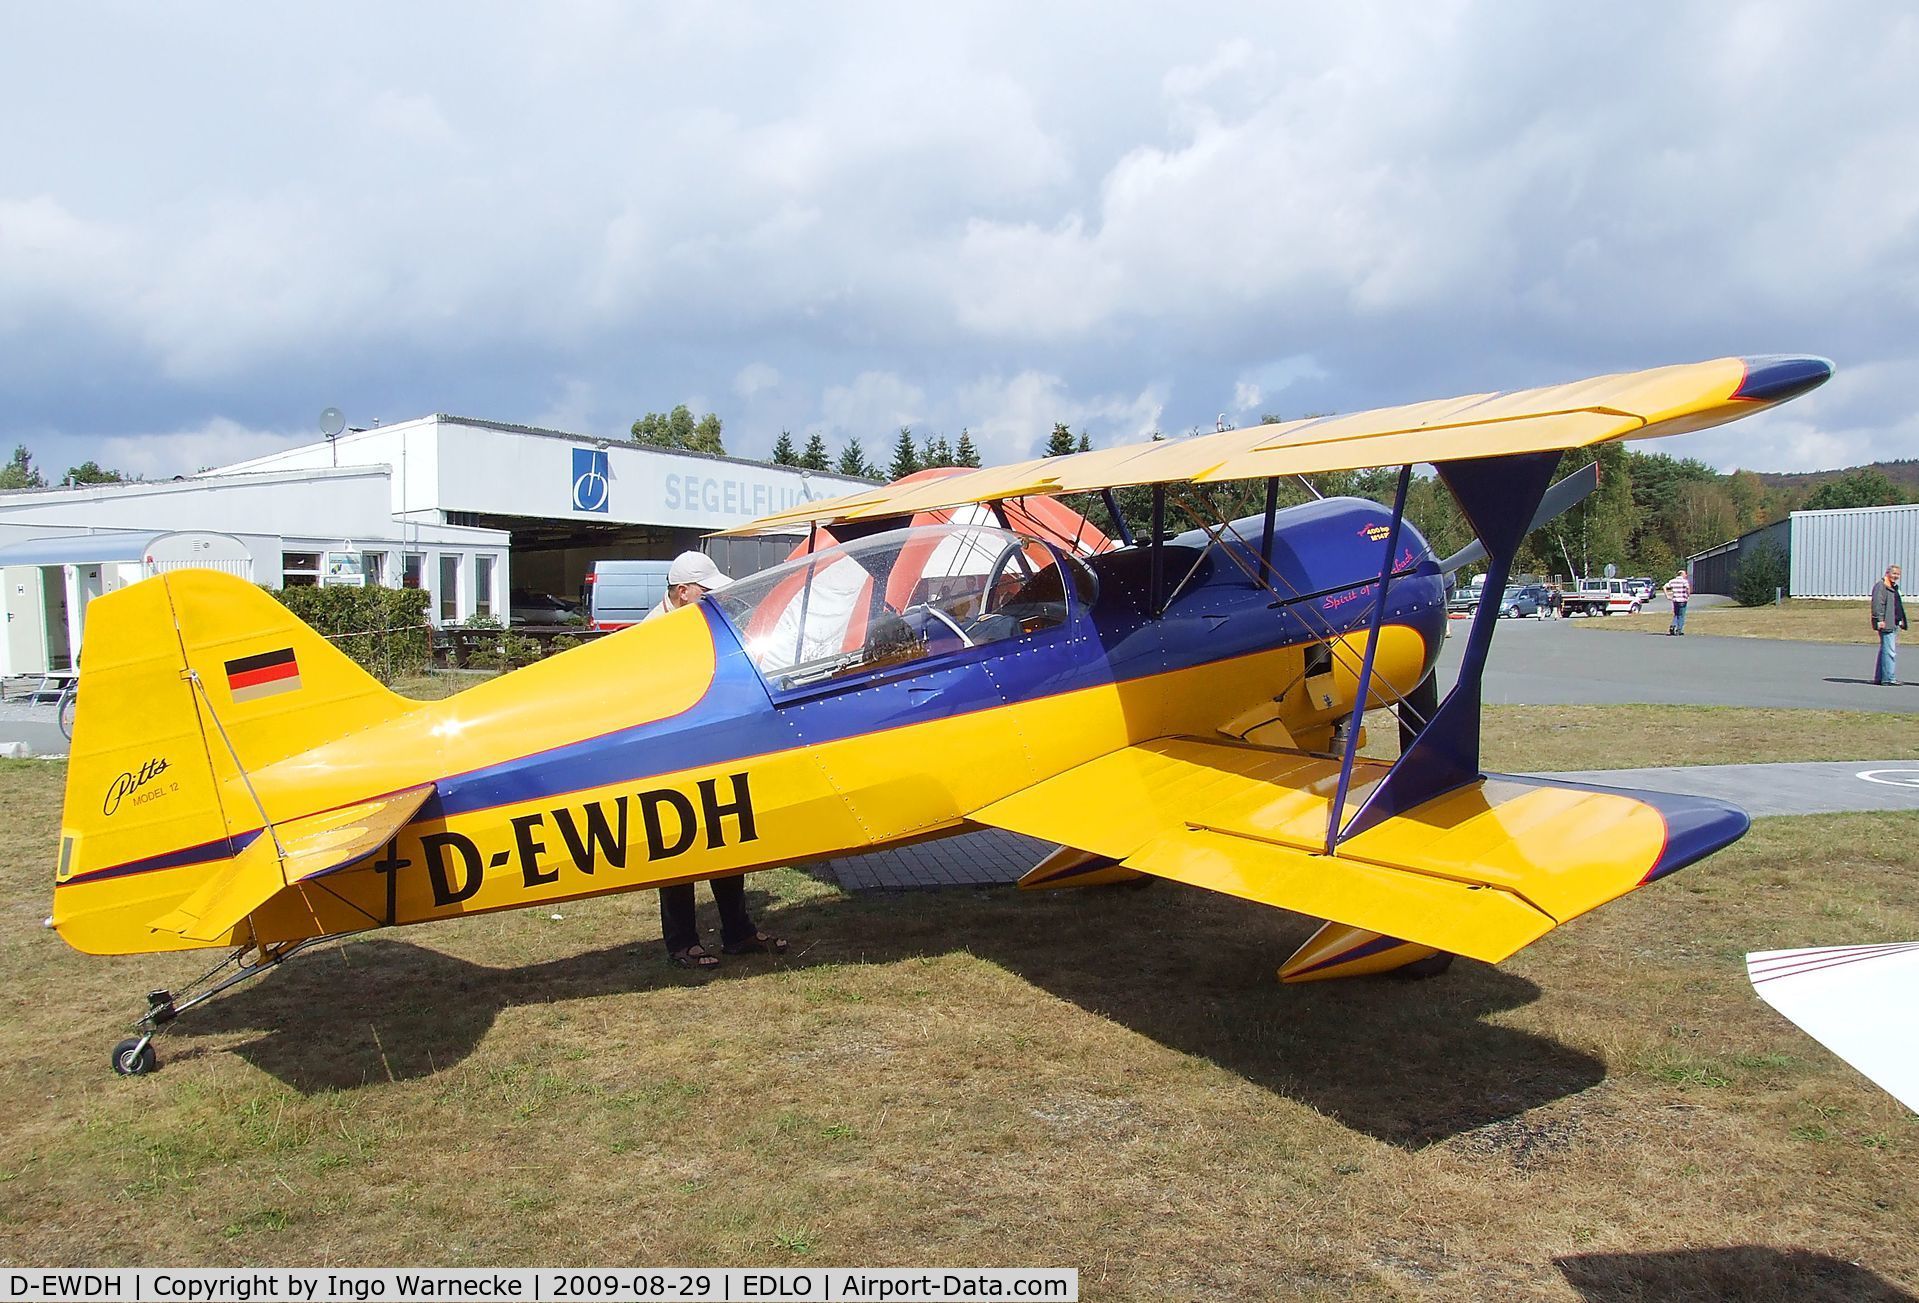 D-EWDH, Pitts Model 12 C/N 202, Pitts (Haag) Model 12 at the 2009 OUV-Meeting at Oerlinghausen airfield